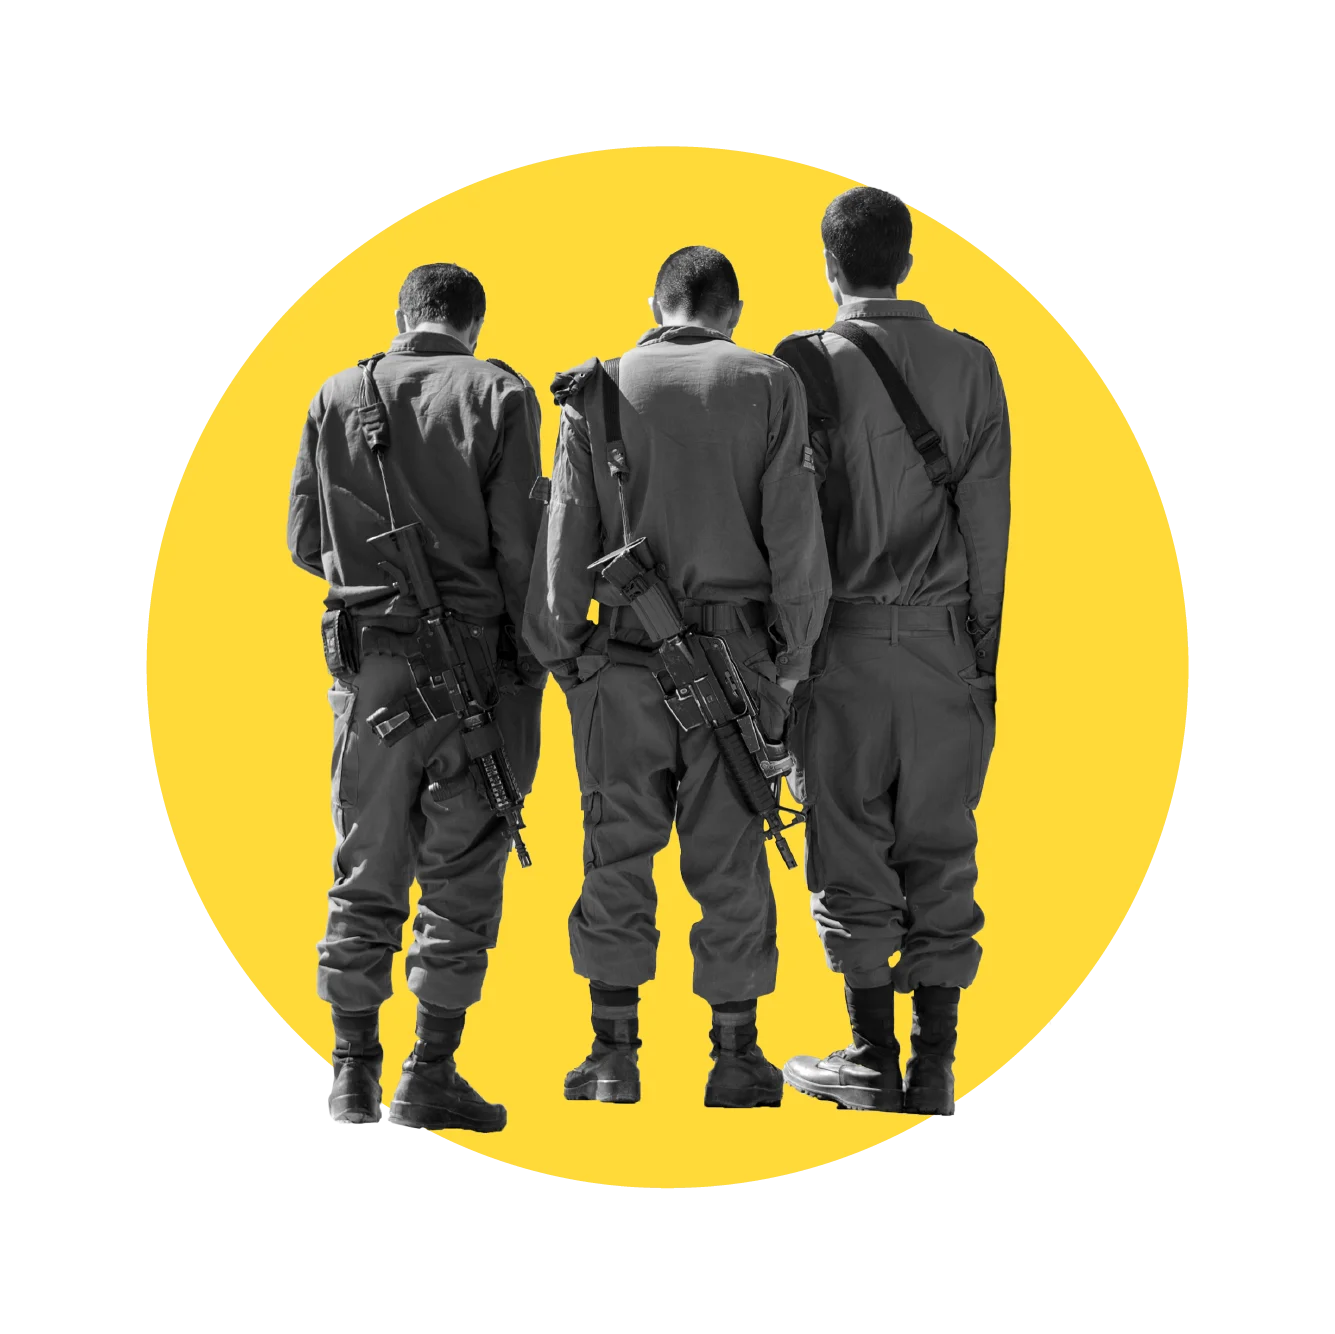 Yellow circle with the backs of three soldiers